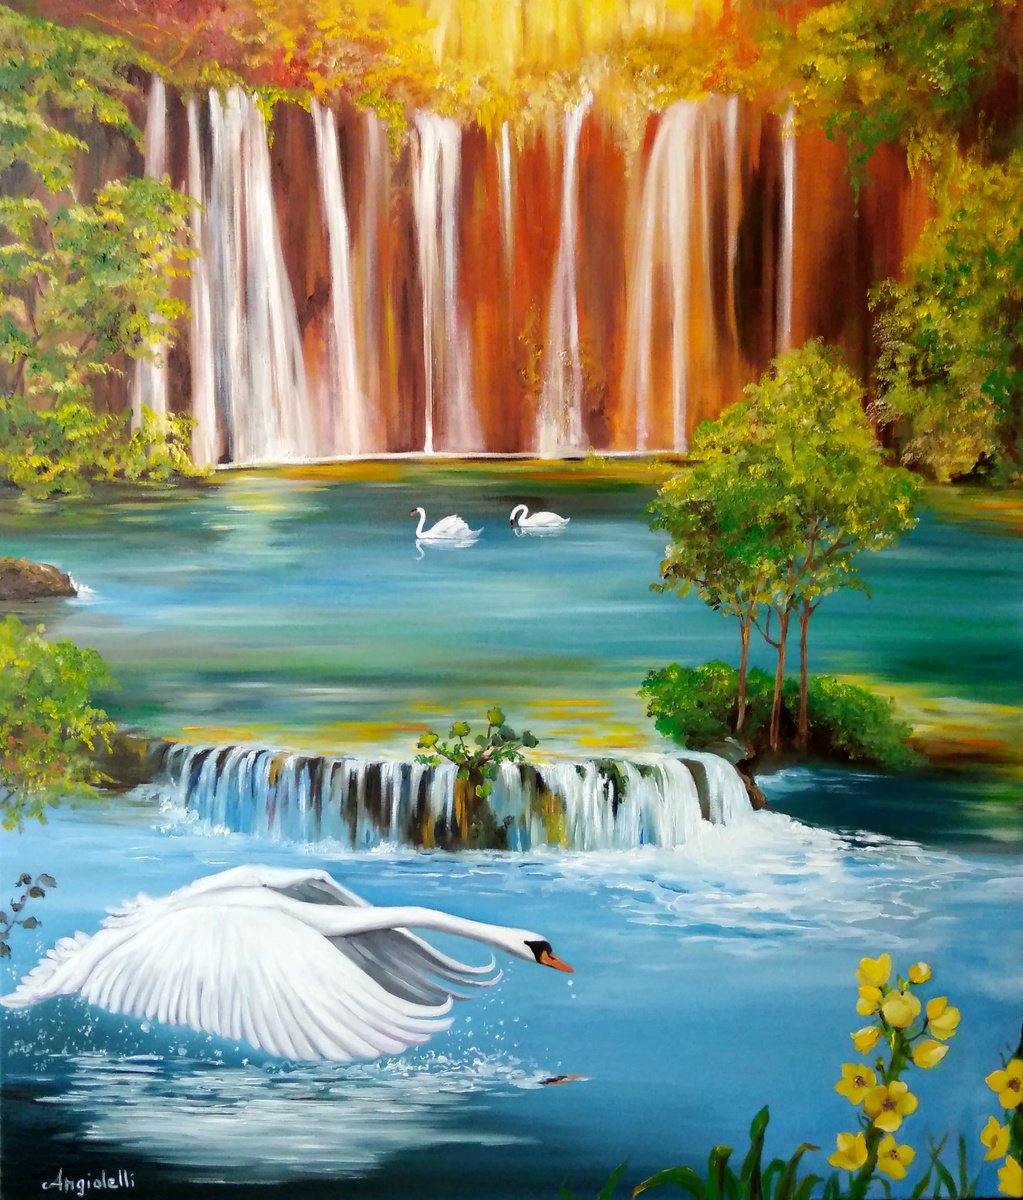 Landscape with swans - lake - oil painting - home decor by Anna Rita Angiolelli